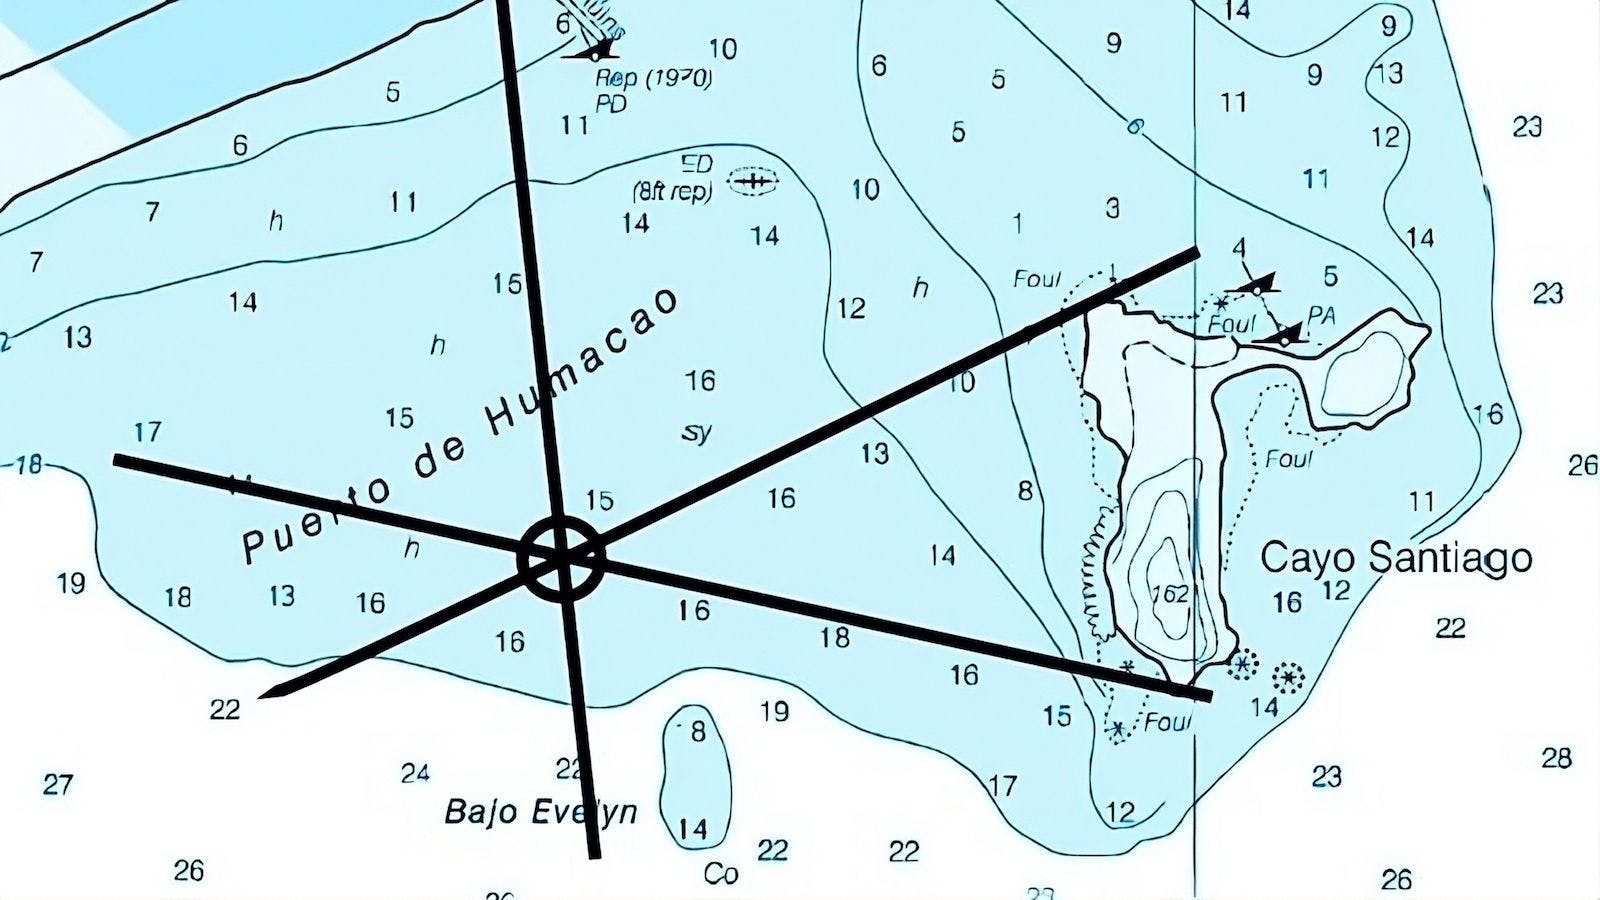 Visual fix by three bearings plotted on a nautical chart